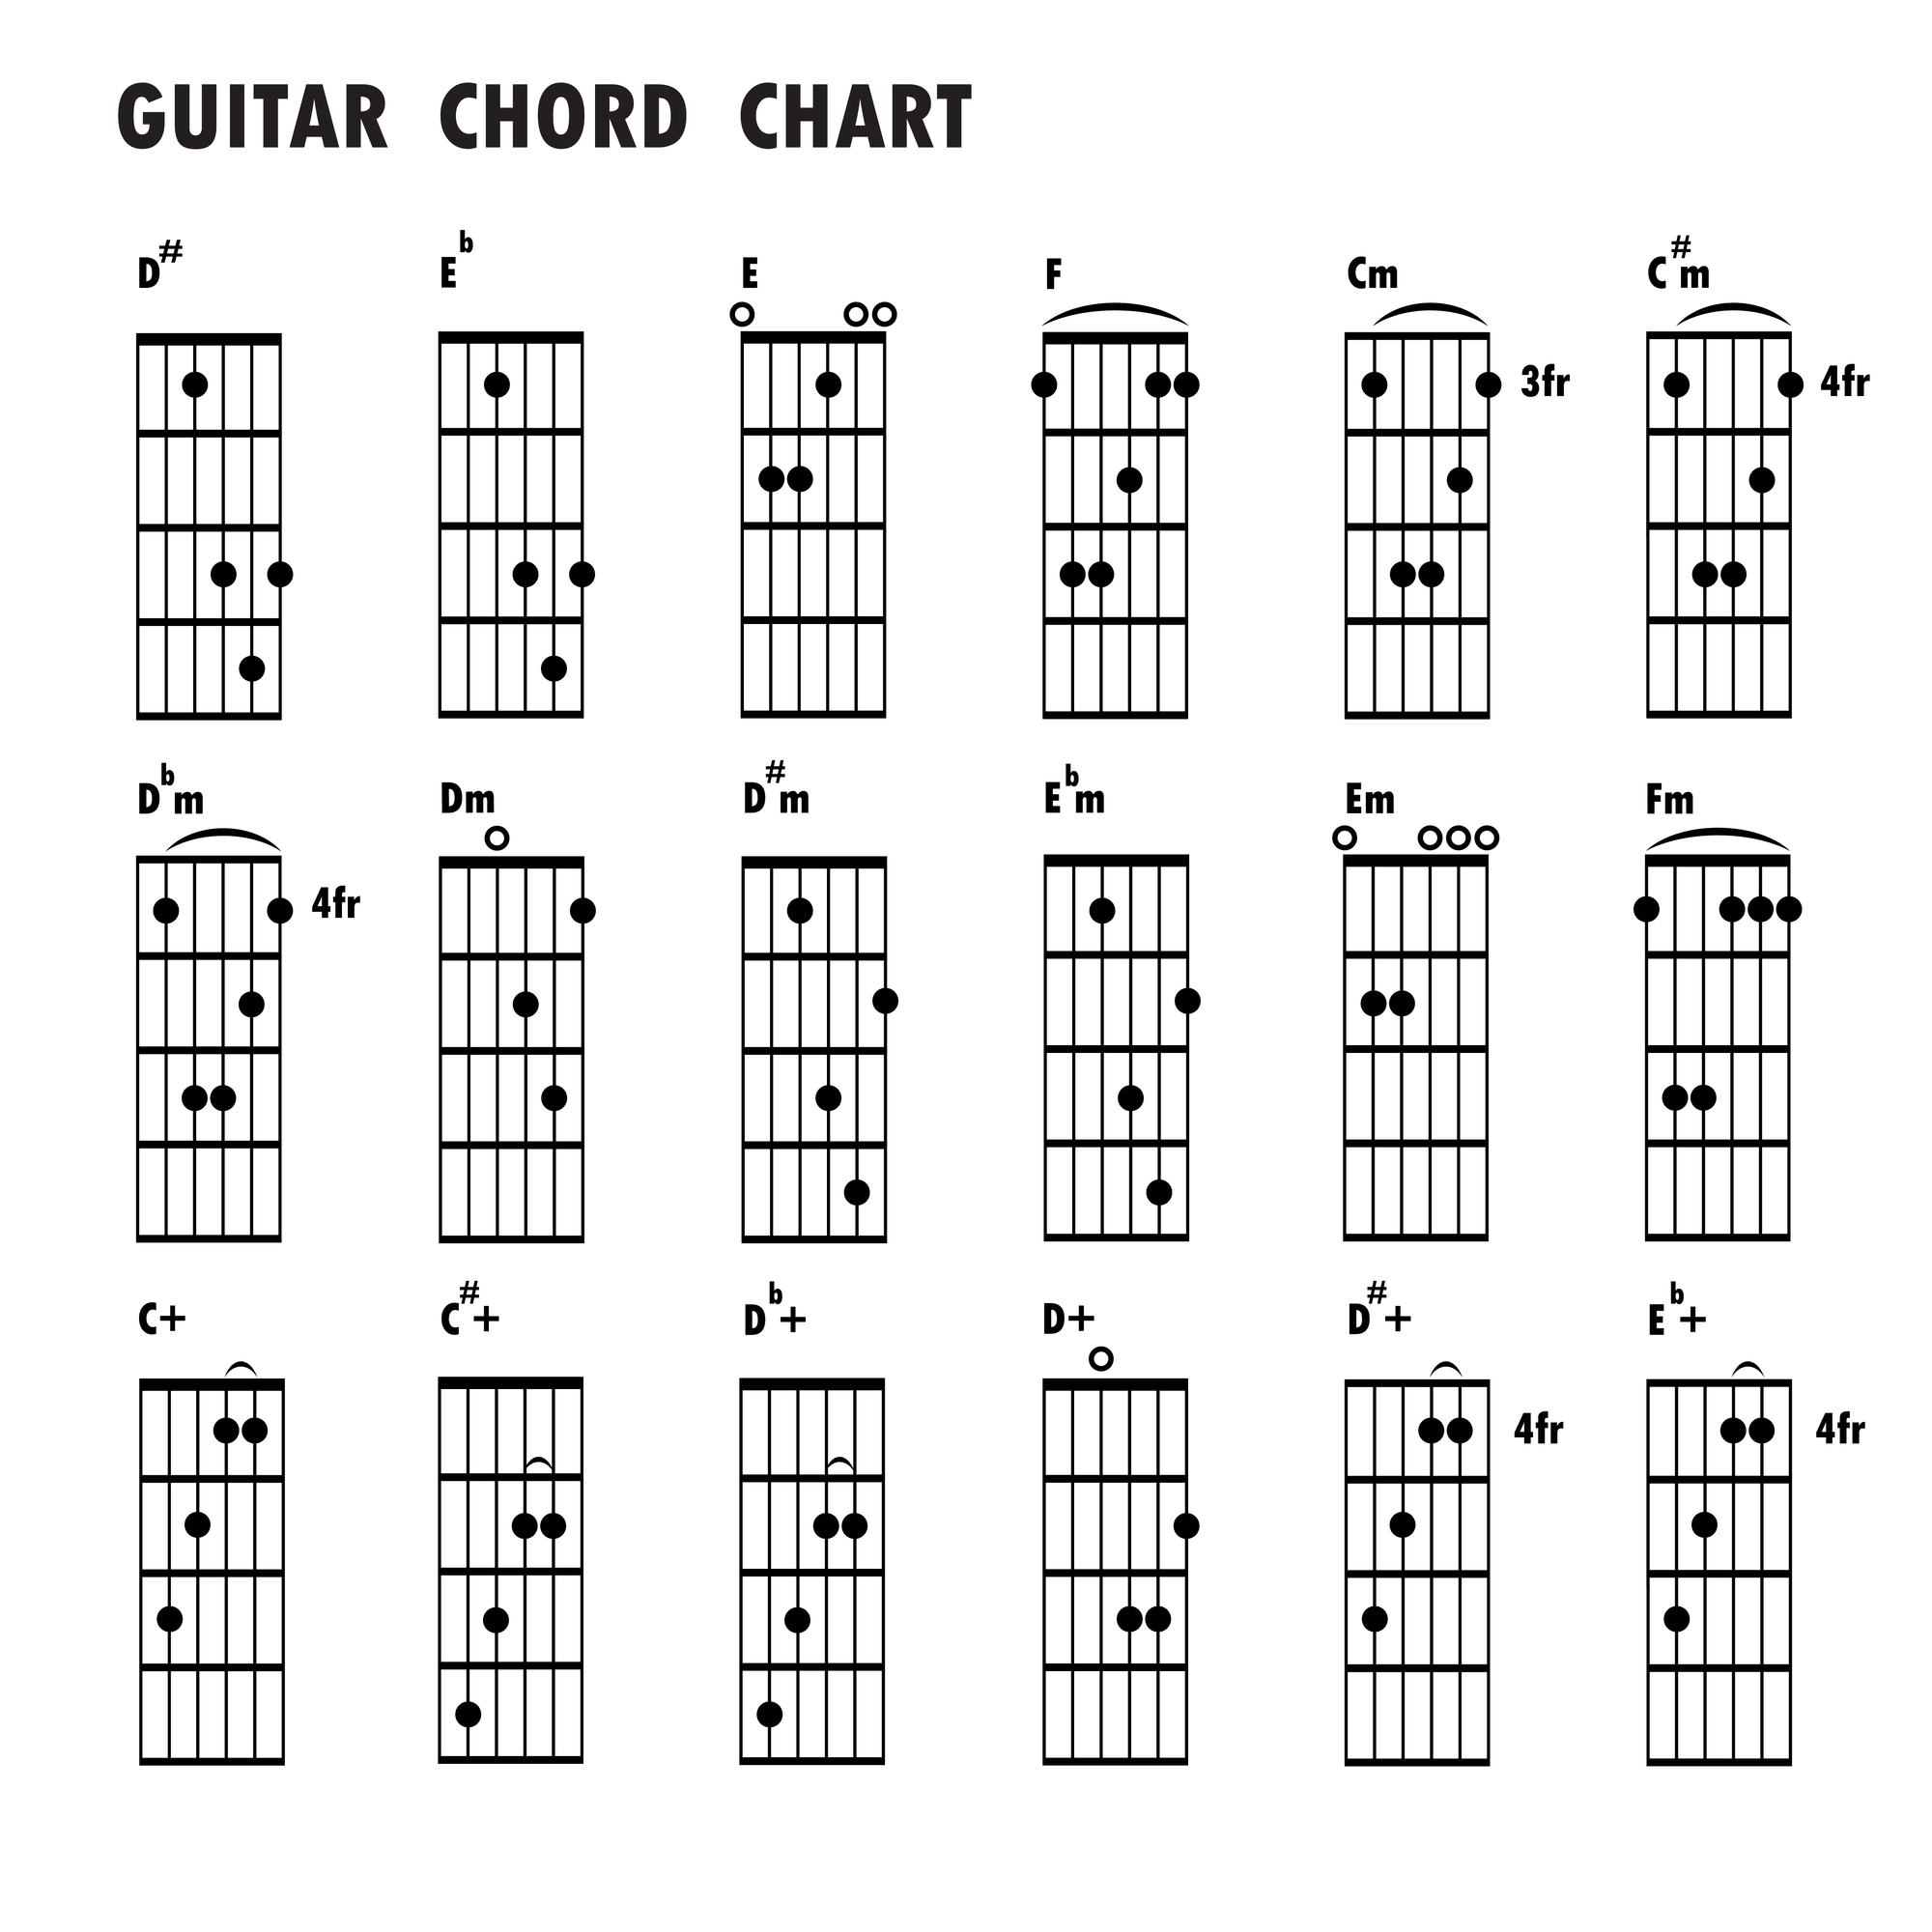 C M Guitar Chord Count On Me Guitar Chords Chart 2019